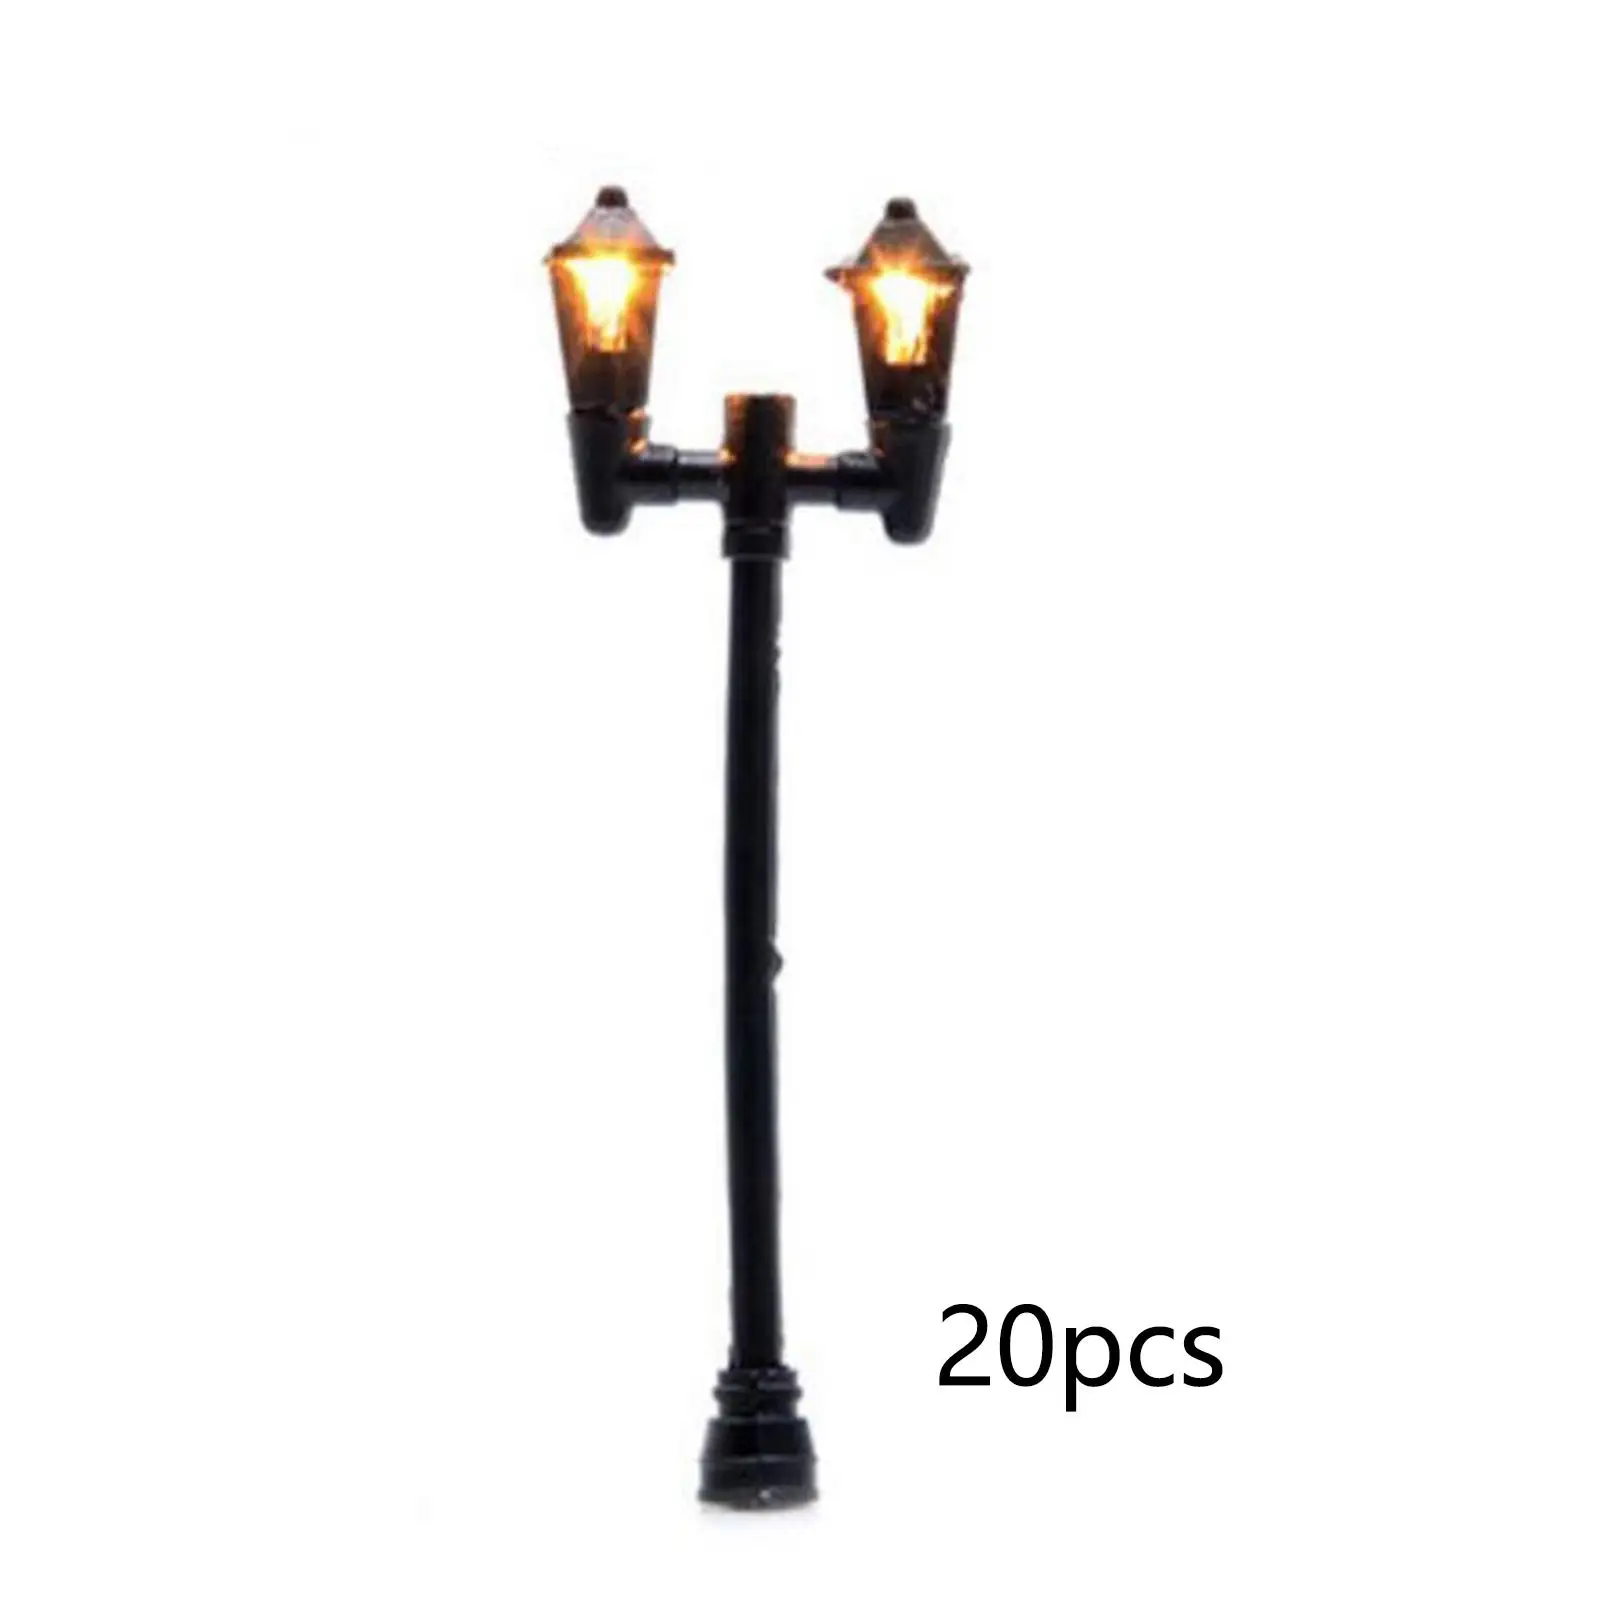 20x Model Train Lamp Lighted Street Lamps DIY Projects Dollhouse Decoration